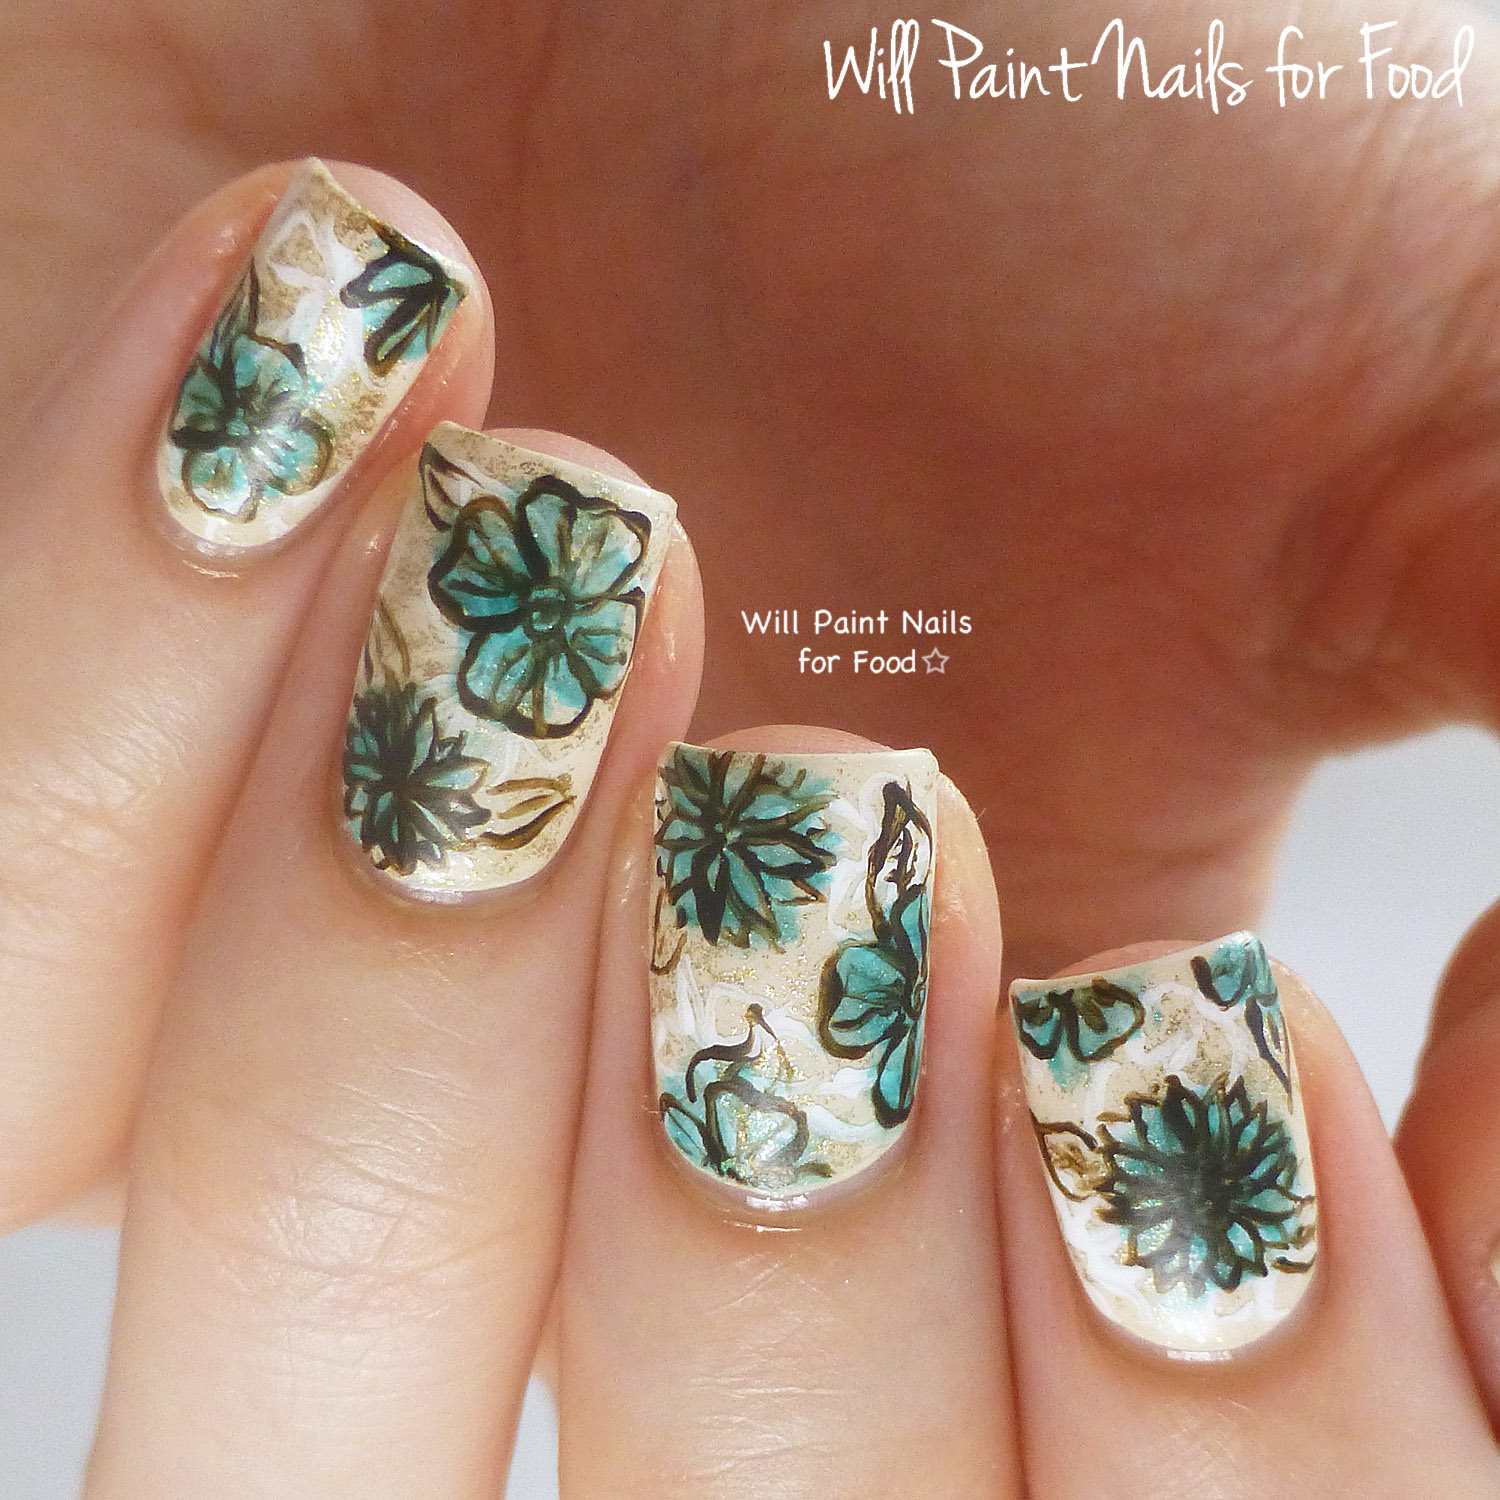 Vintage-inspired freehand floral nail art